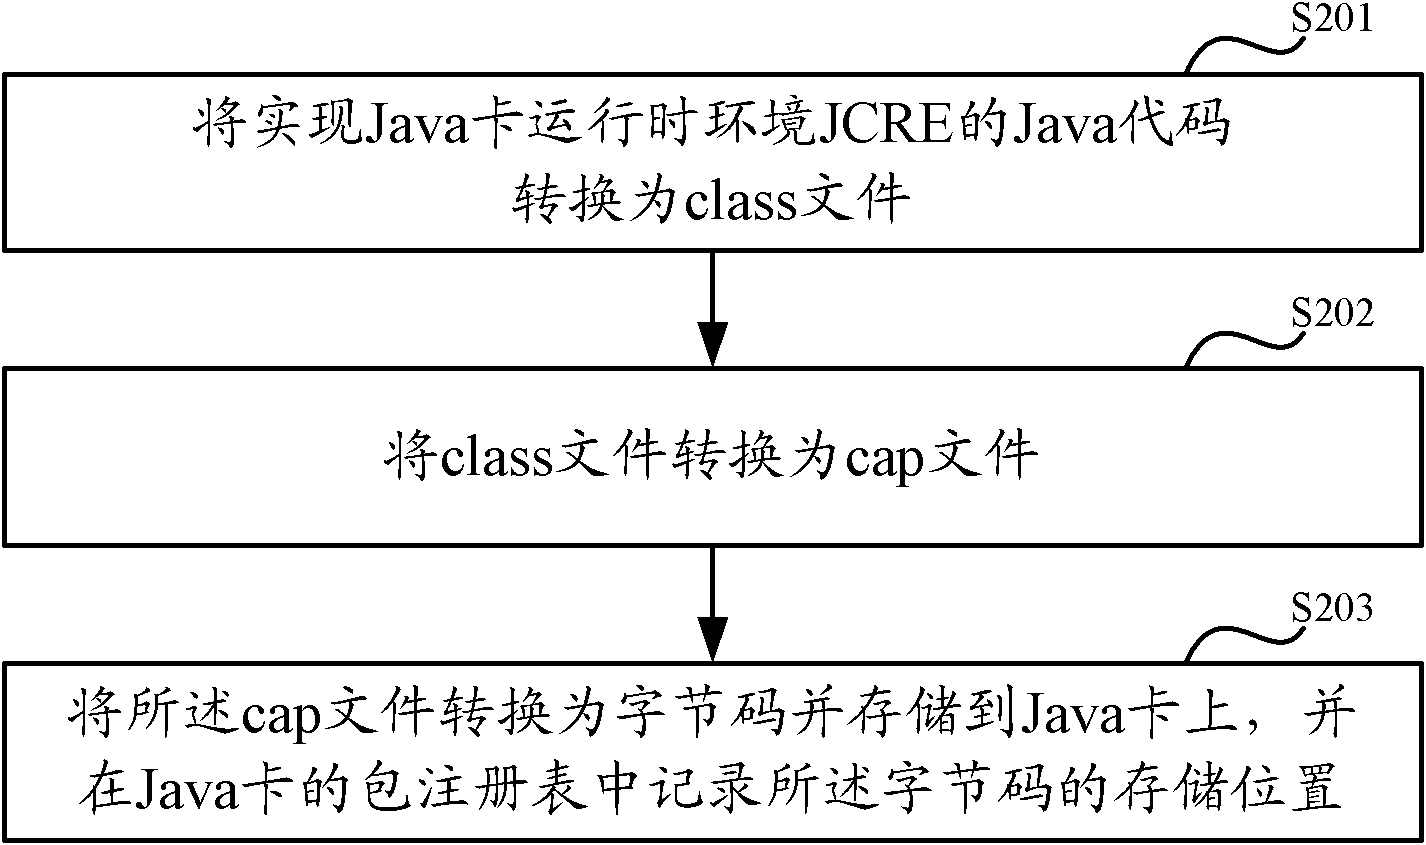 Method and system for storing bytecode of JCRE (Java card run time environment)